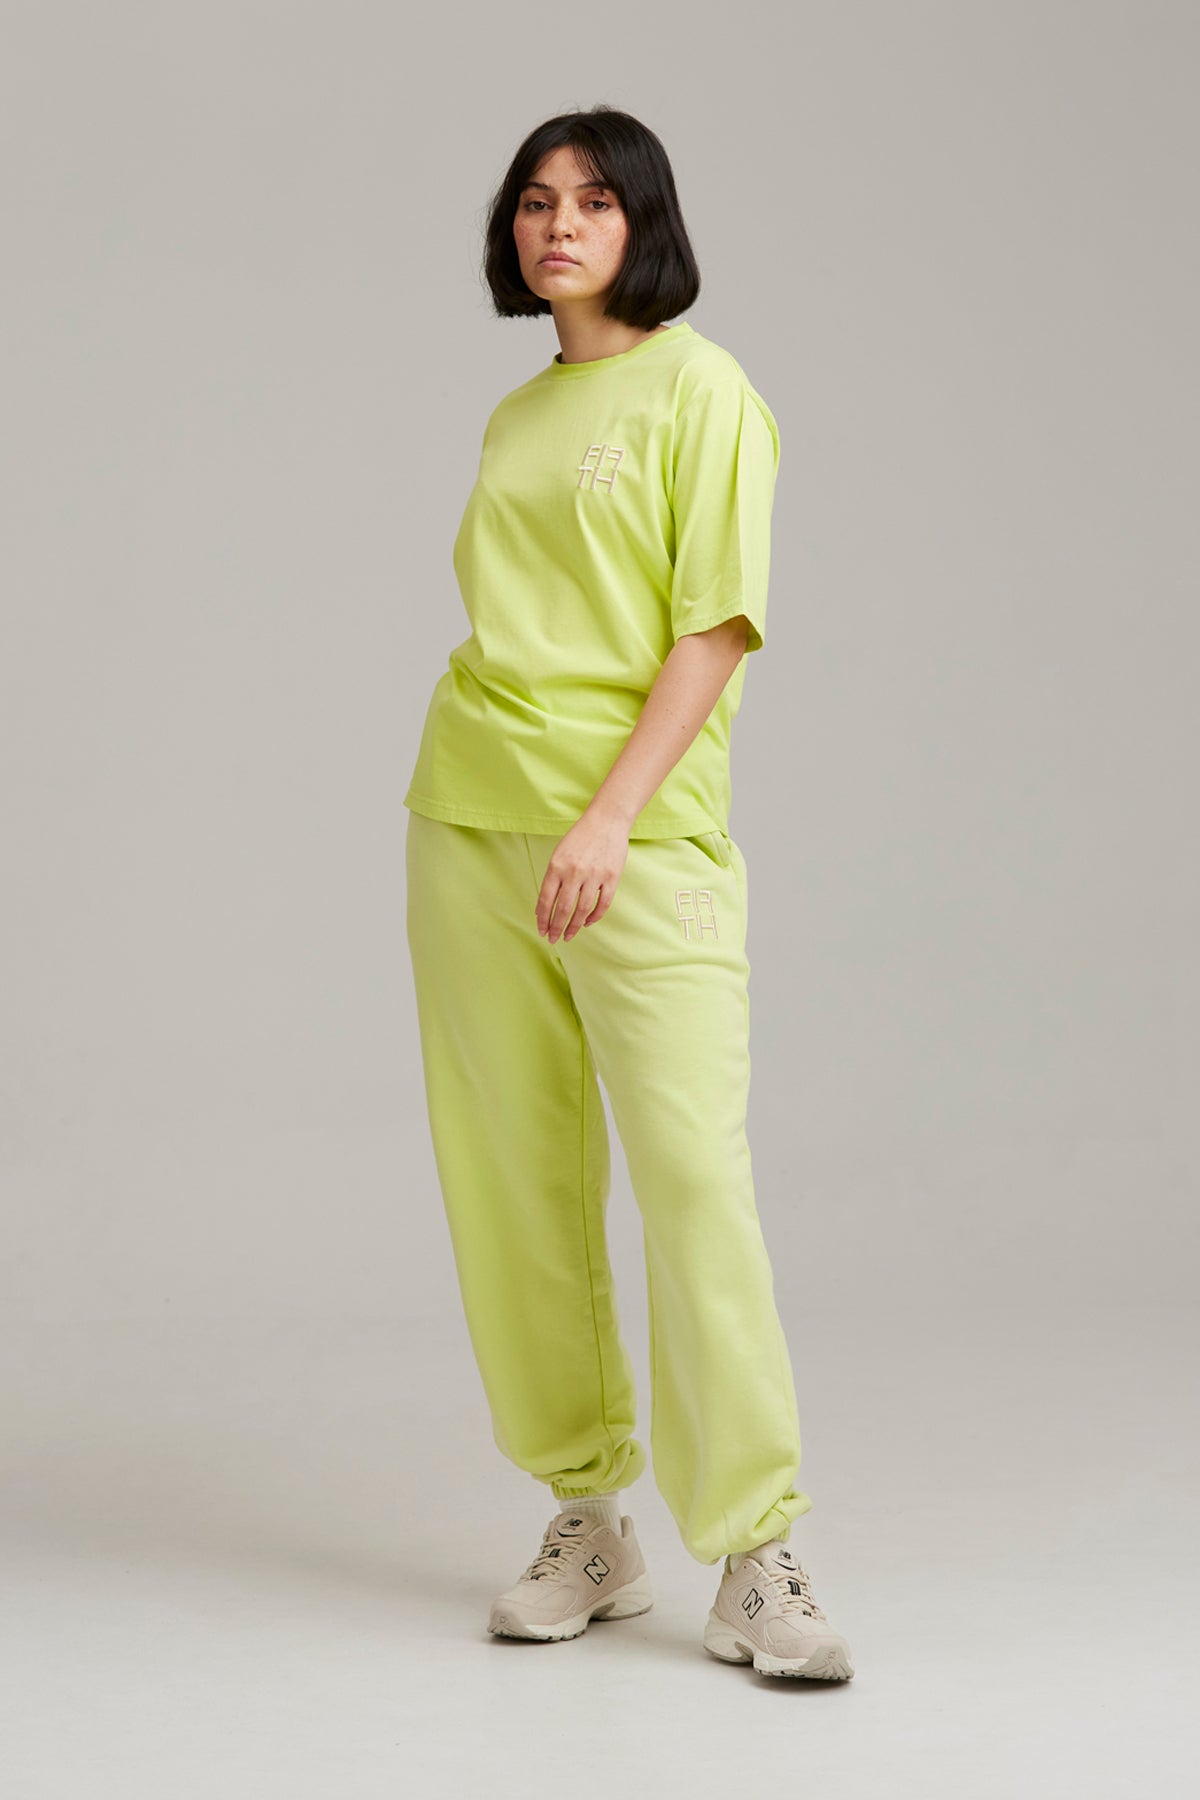 The Fifth Label - Subway T-Shirt - Lime